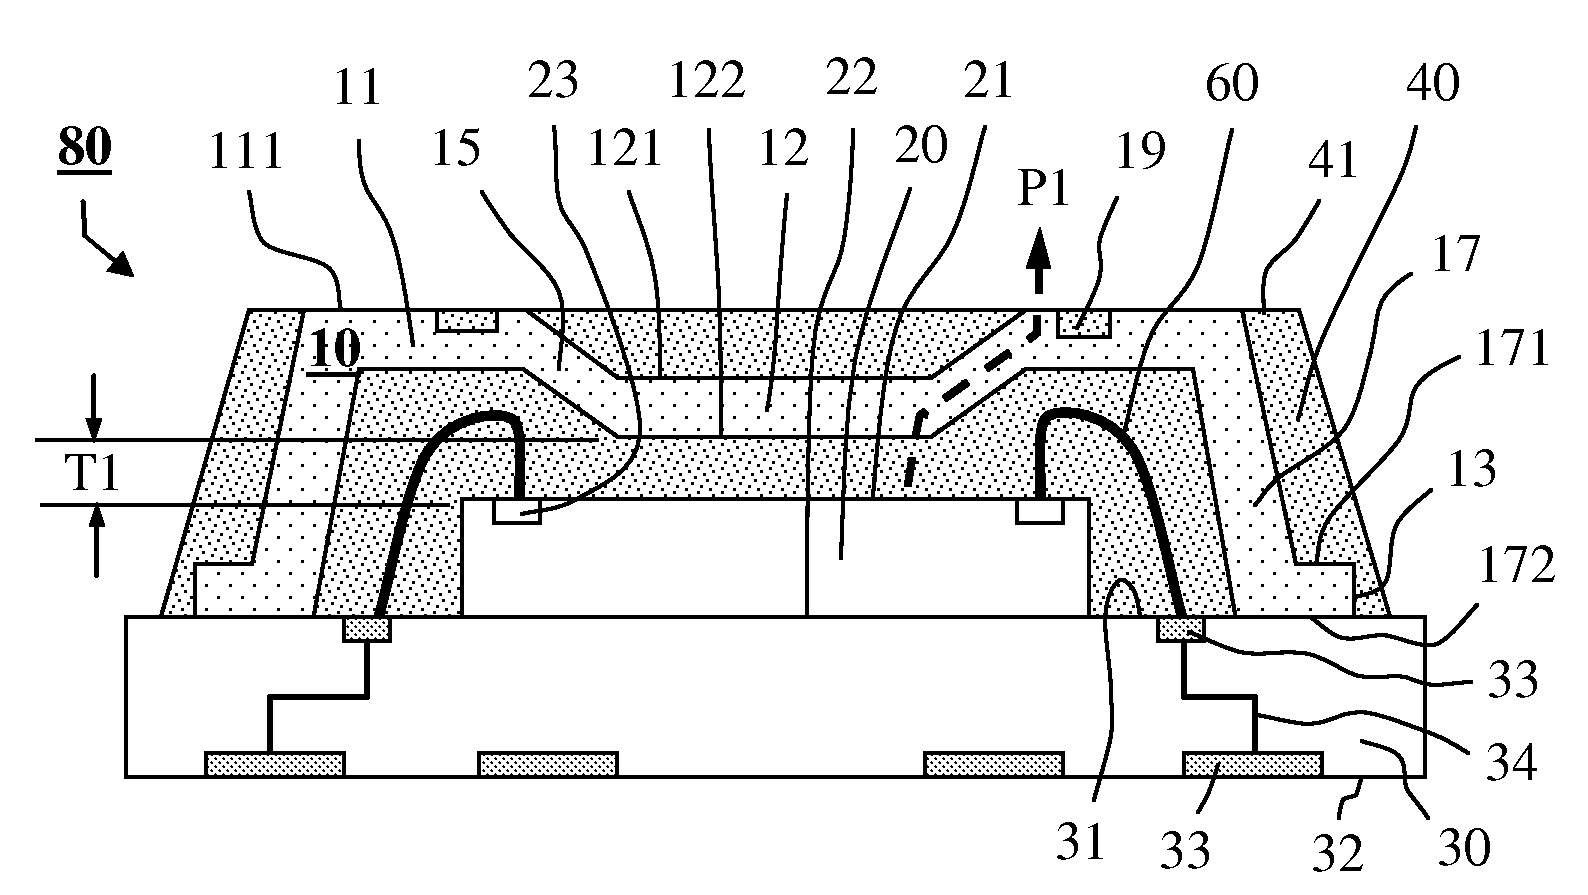 Heat spreader for an electrical device